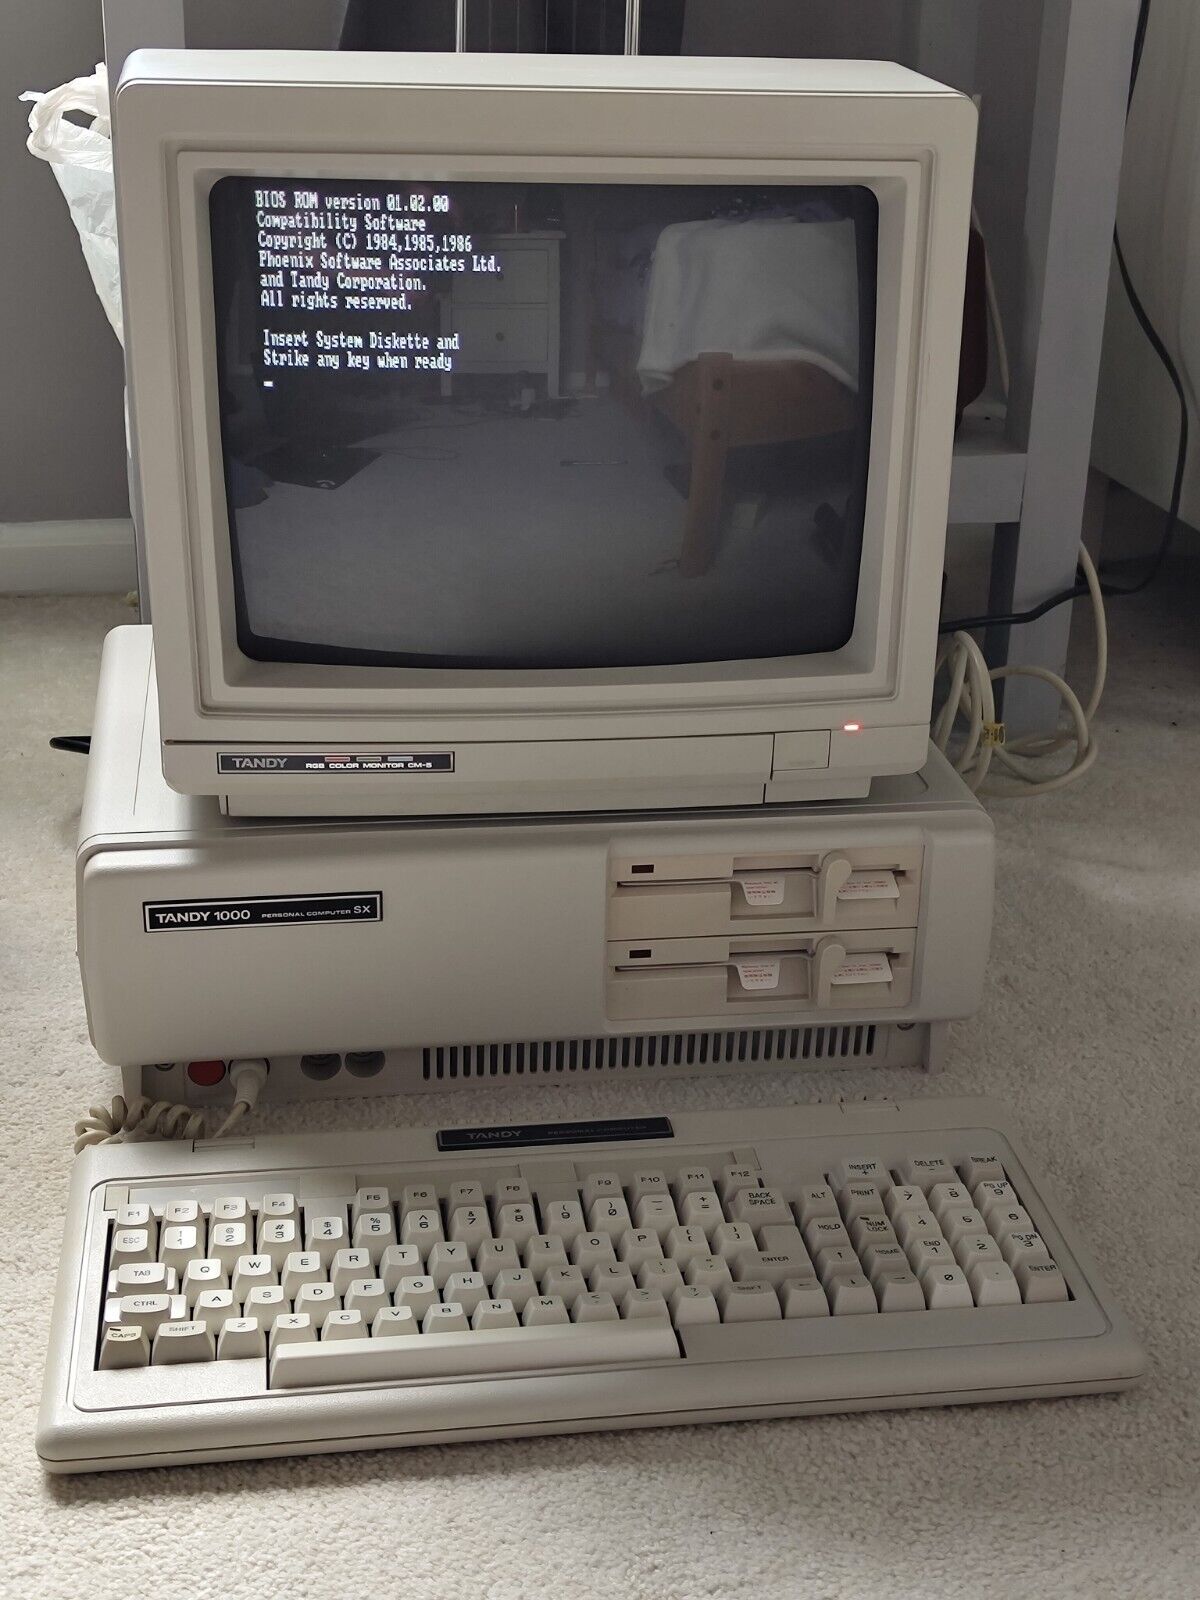 Working Tandy 1000 SX With CM-5 Monitor, Boot Discs, Manuals, And Keyboard